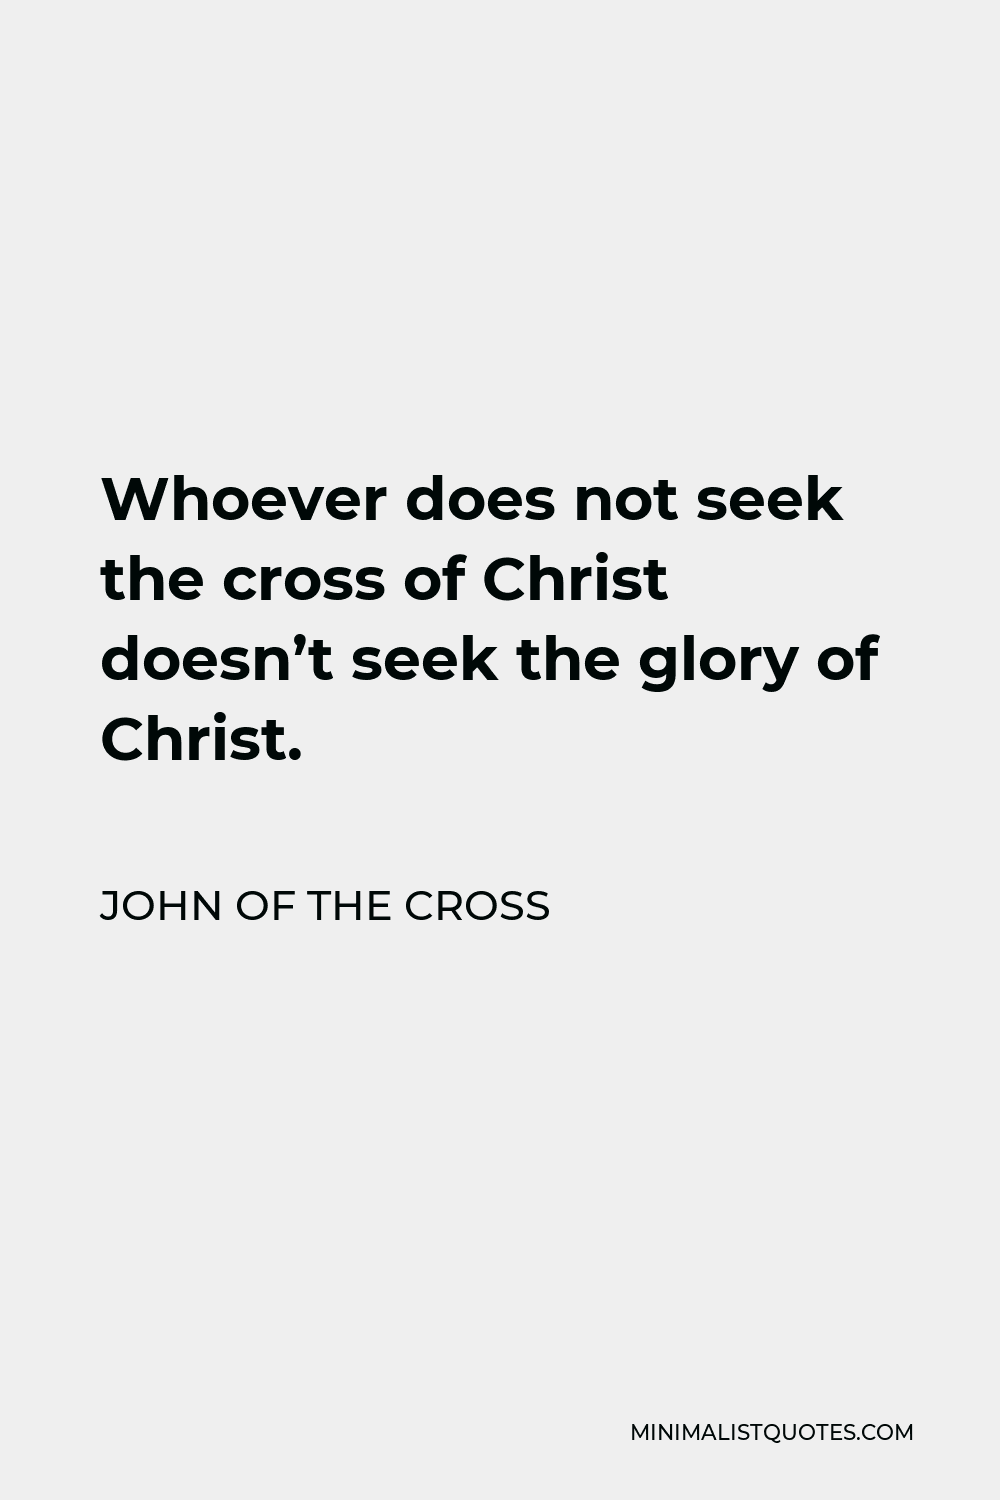 John of the Cross Quote - Whoever does not seek the cross of Christ doesn’t seek the glory of Christ.